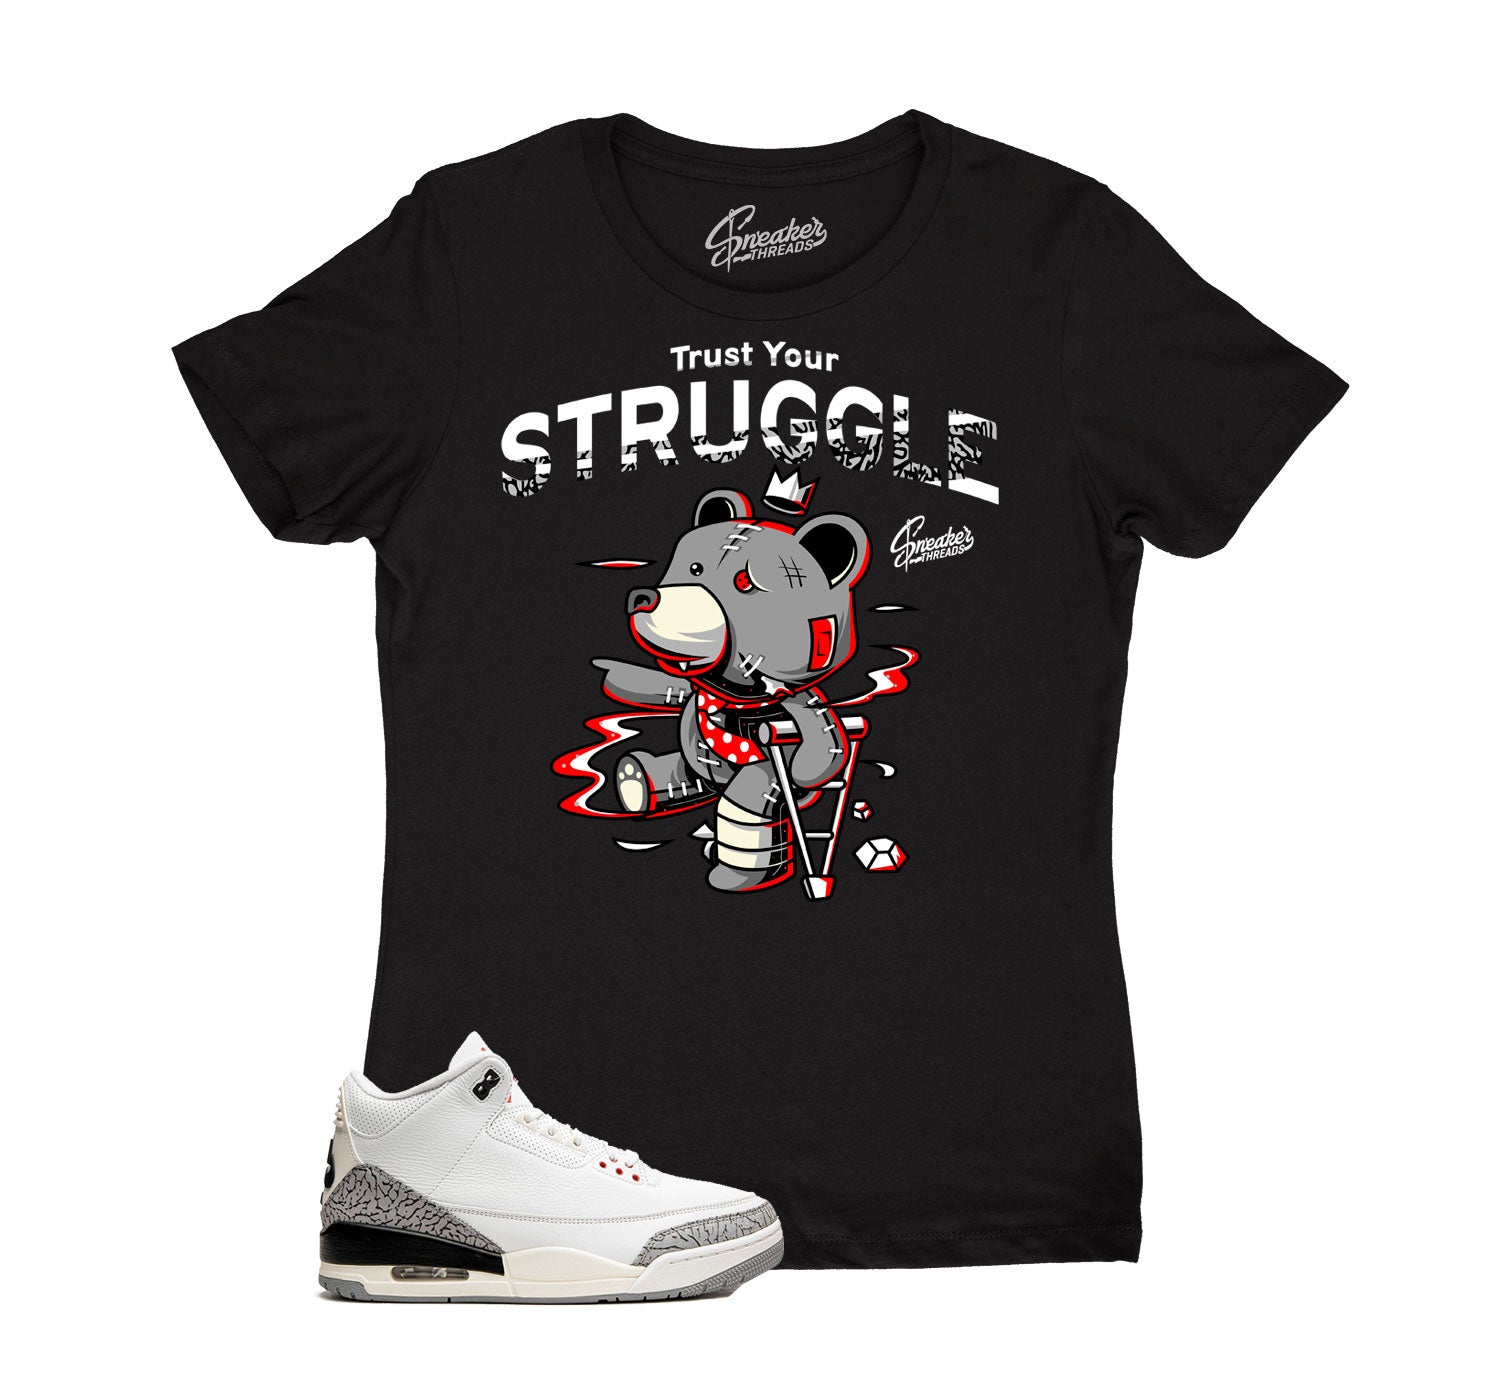 Womens White Cement 3 Reimagined Shirt - Trust Your Struggle - Black